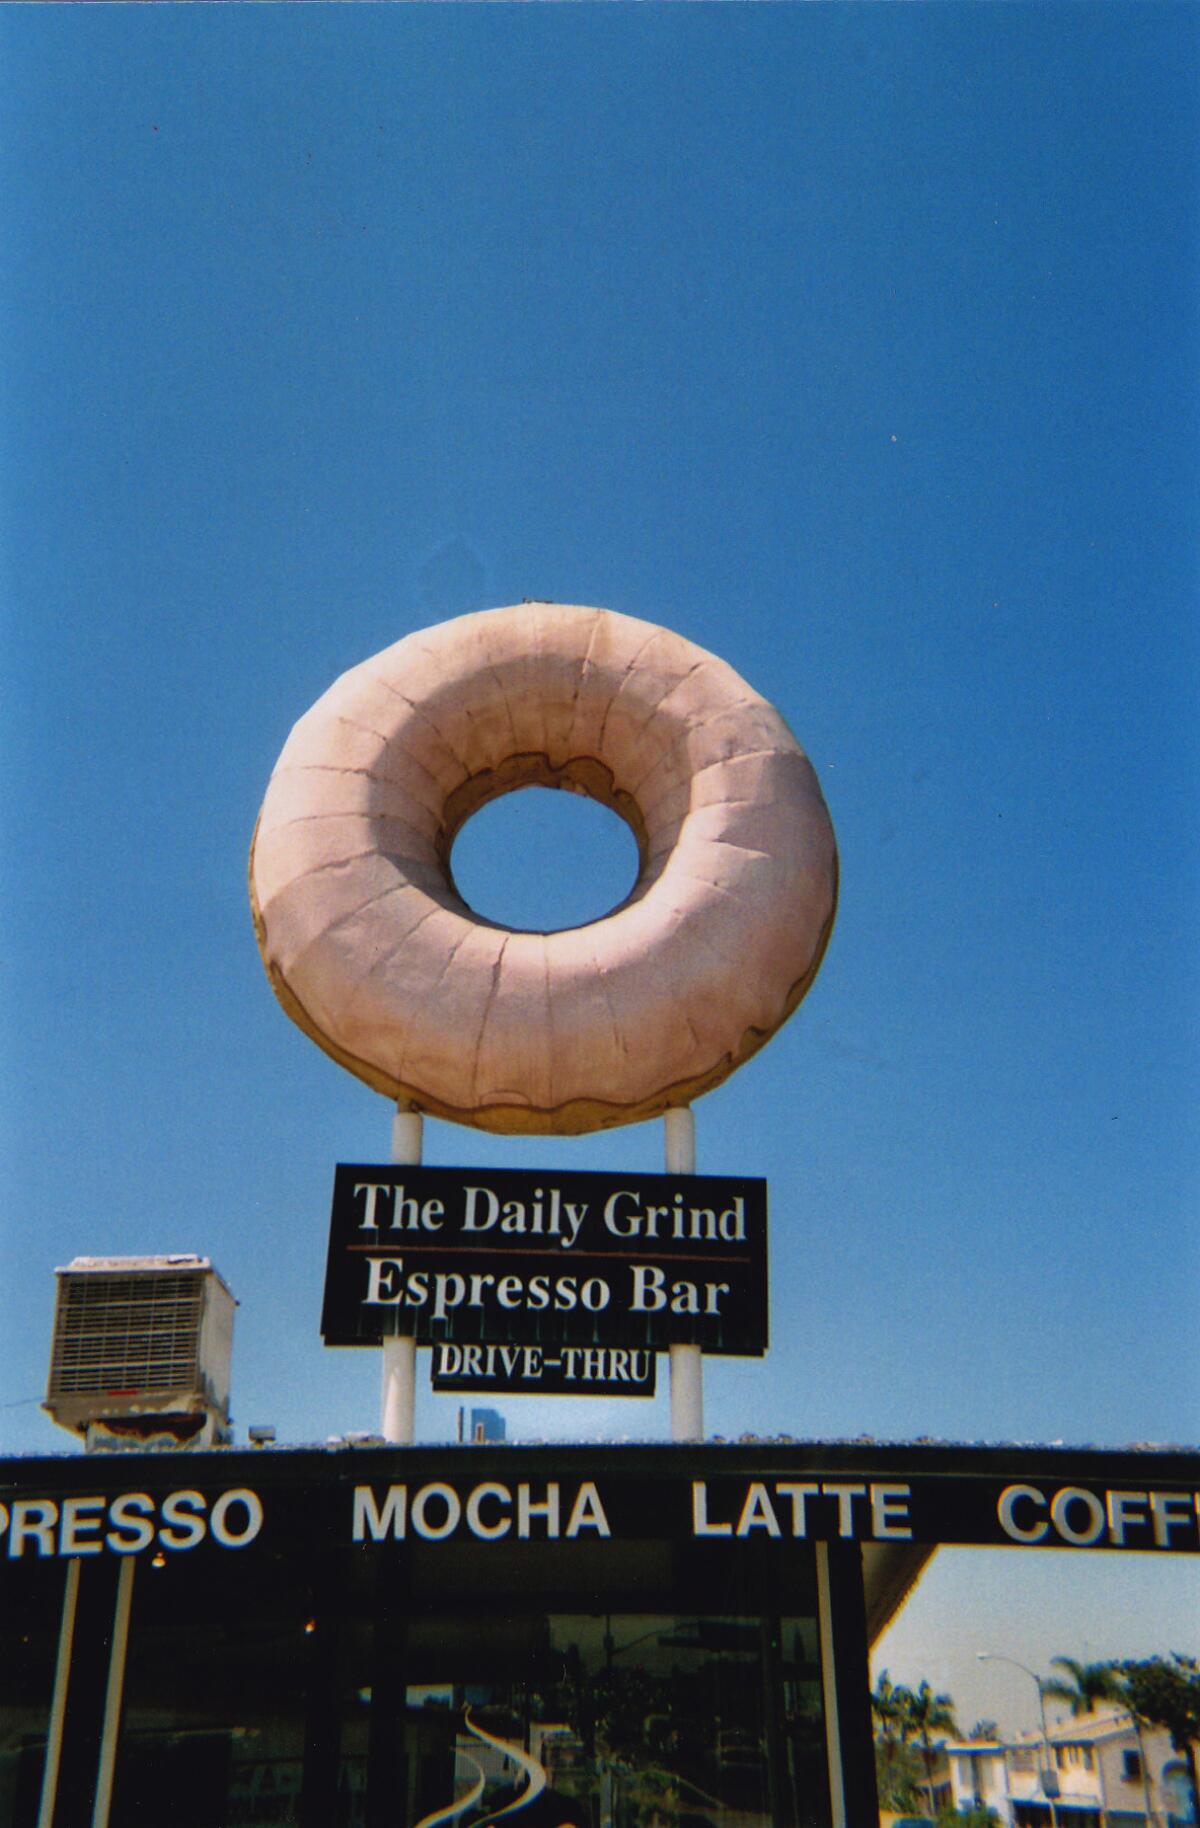 Fans of a giant doughnut structure atop a cafe sign in Long Beach have succeeded in convincing new owner Dunkin' Donuts to keep the local landmark.